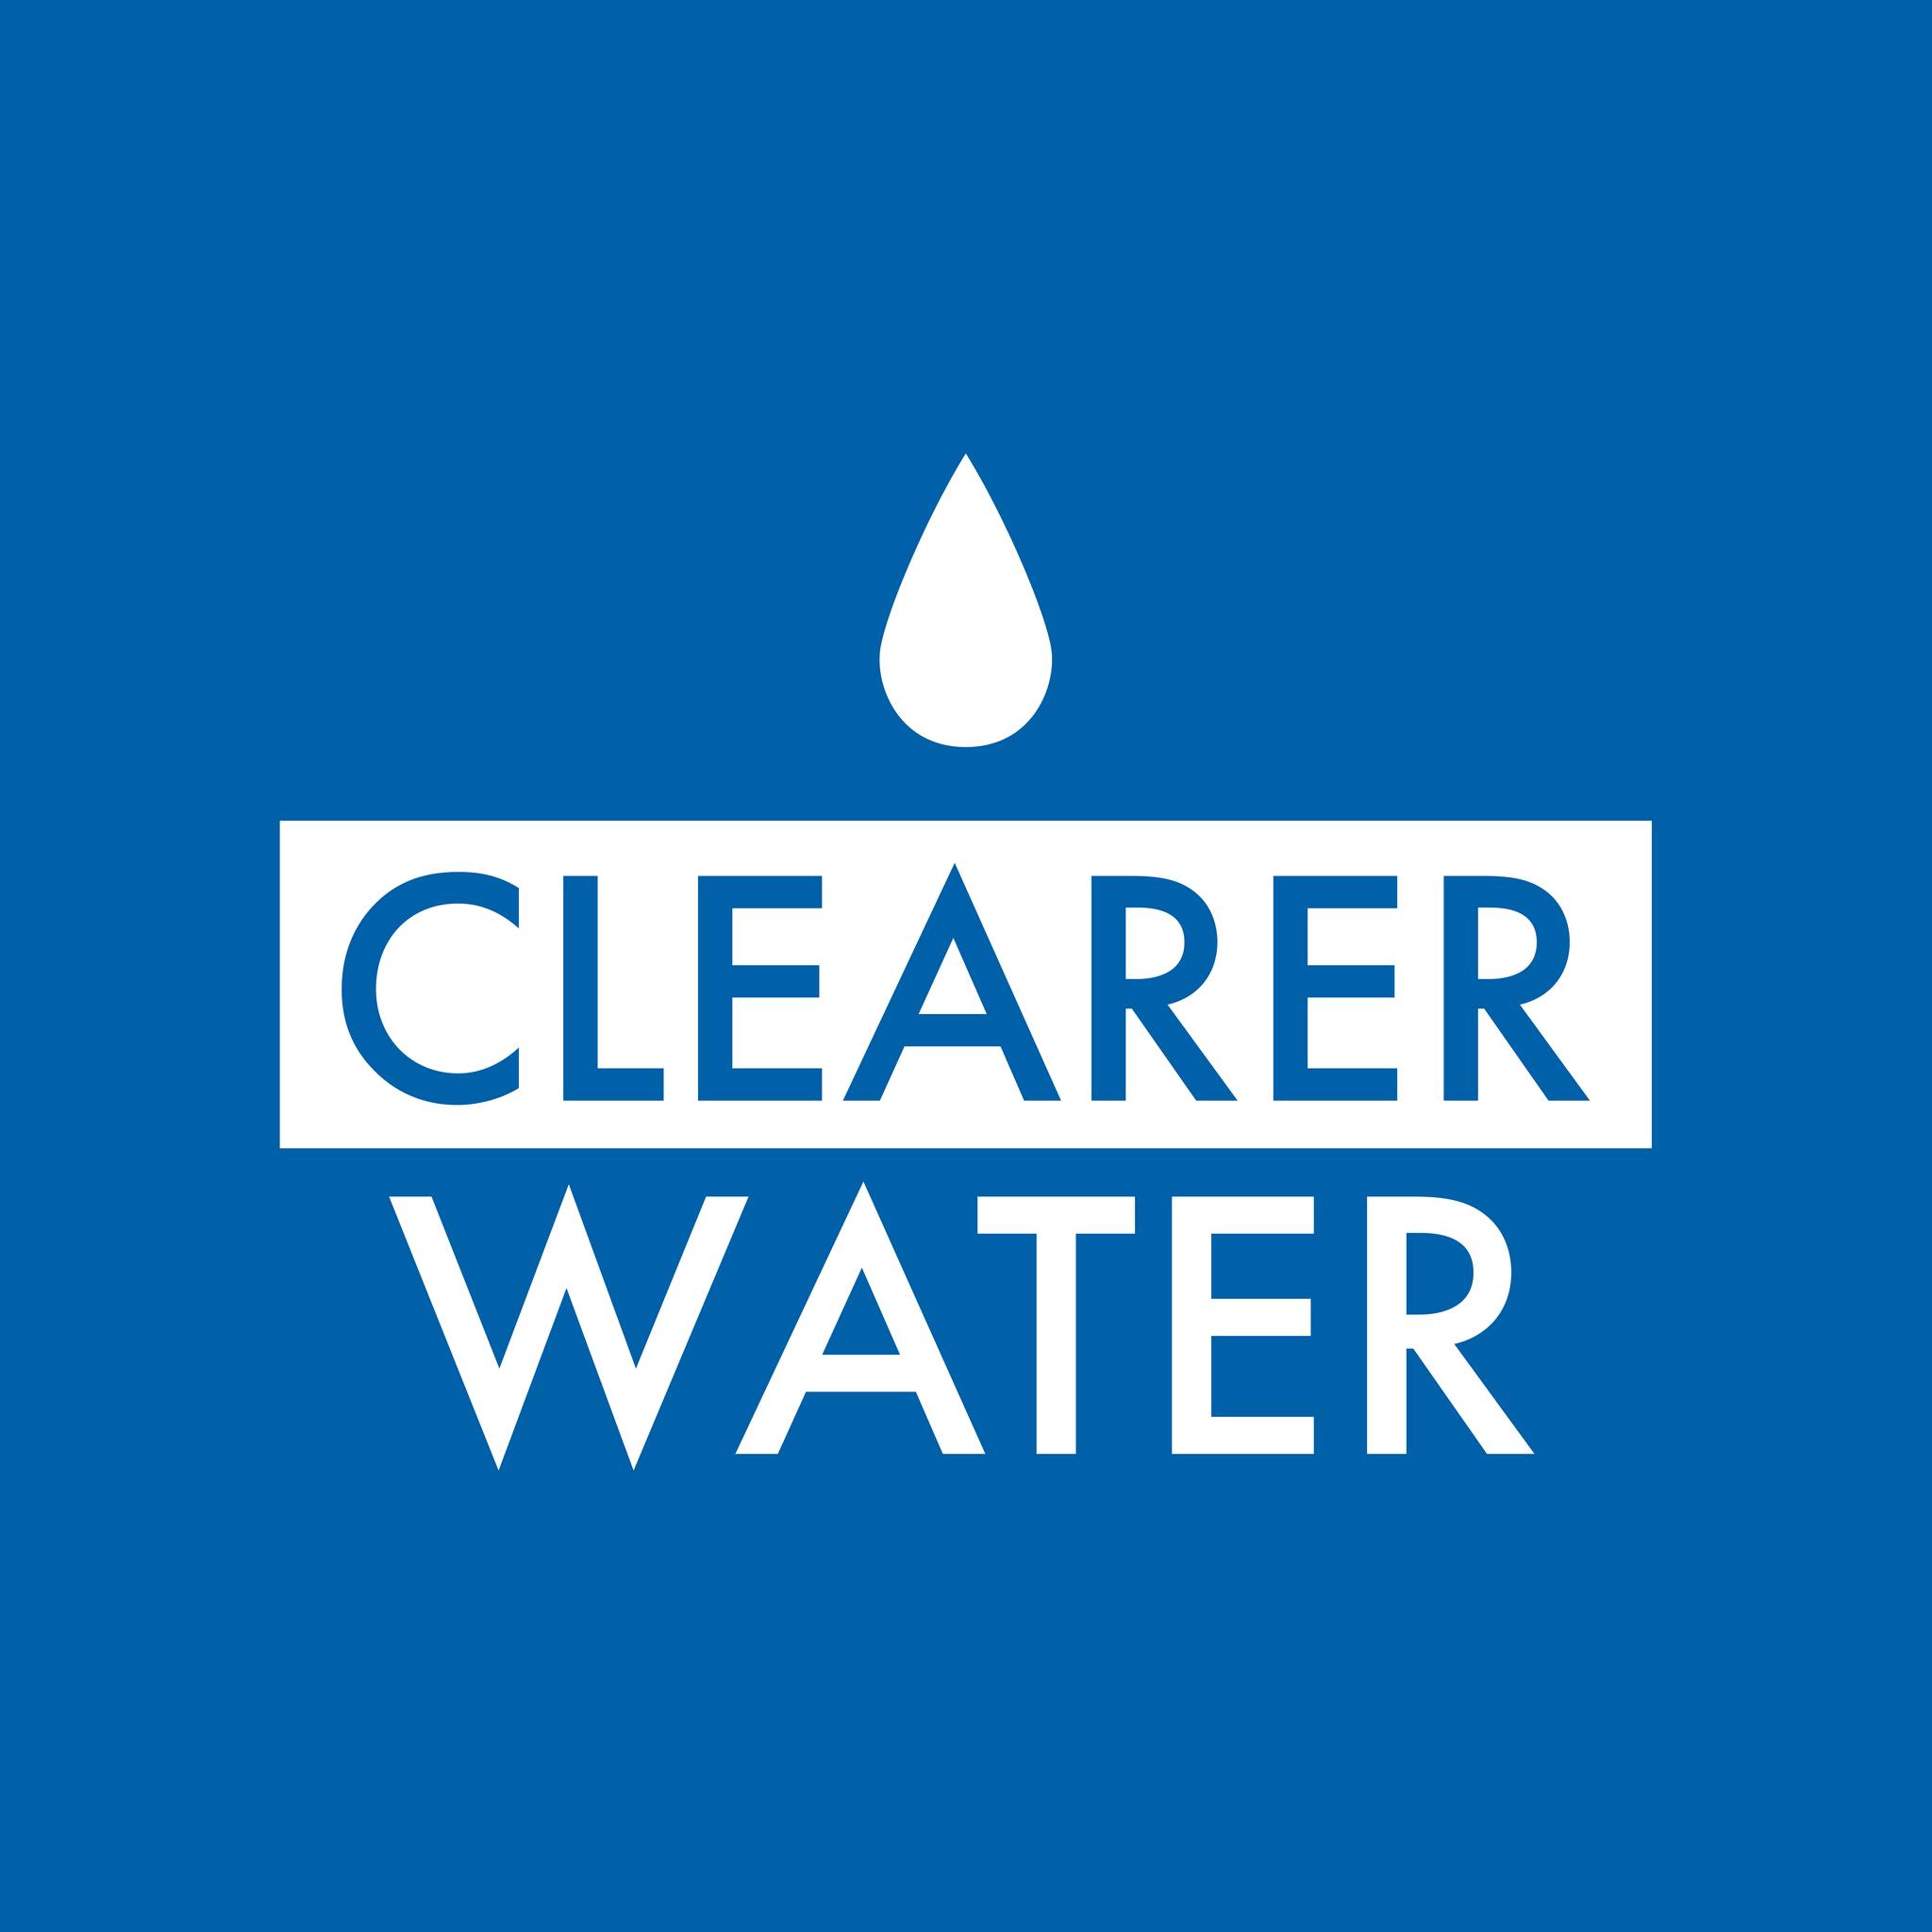 how ethical is Clearer Water?